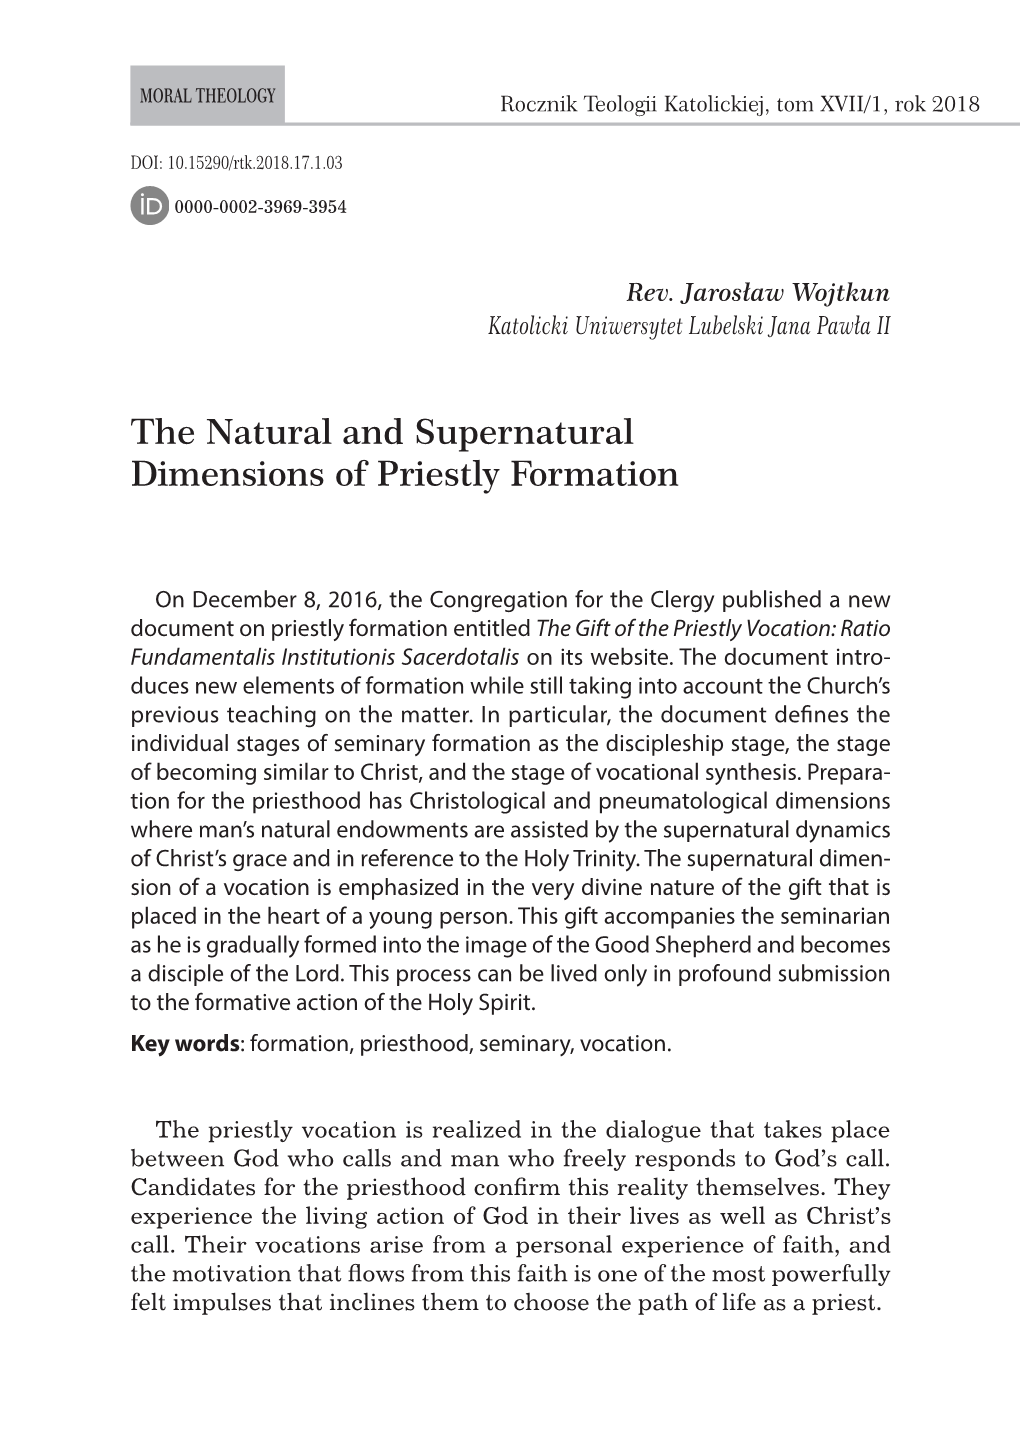 The Natural and Supernatural Dimensions of Priestly Formation